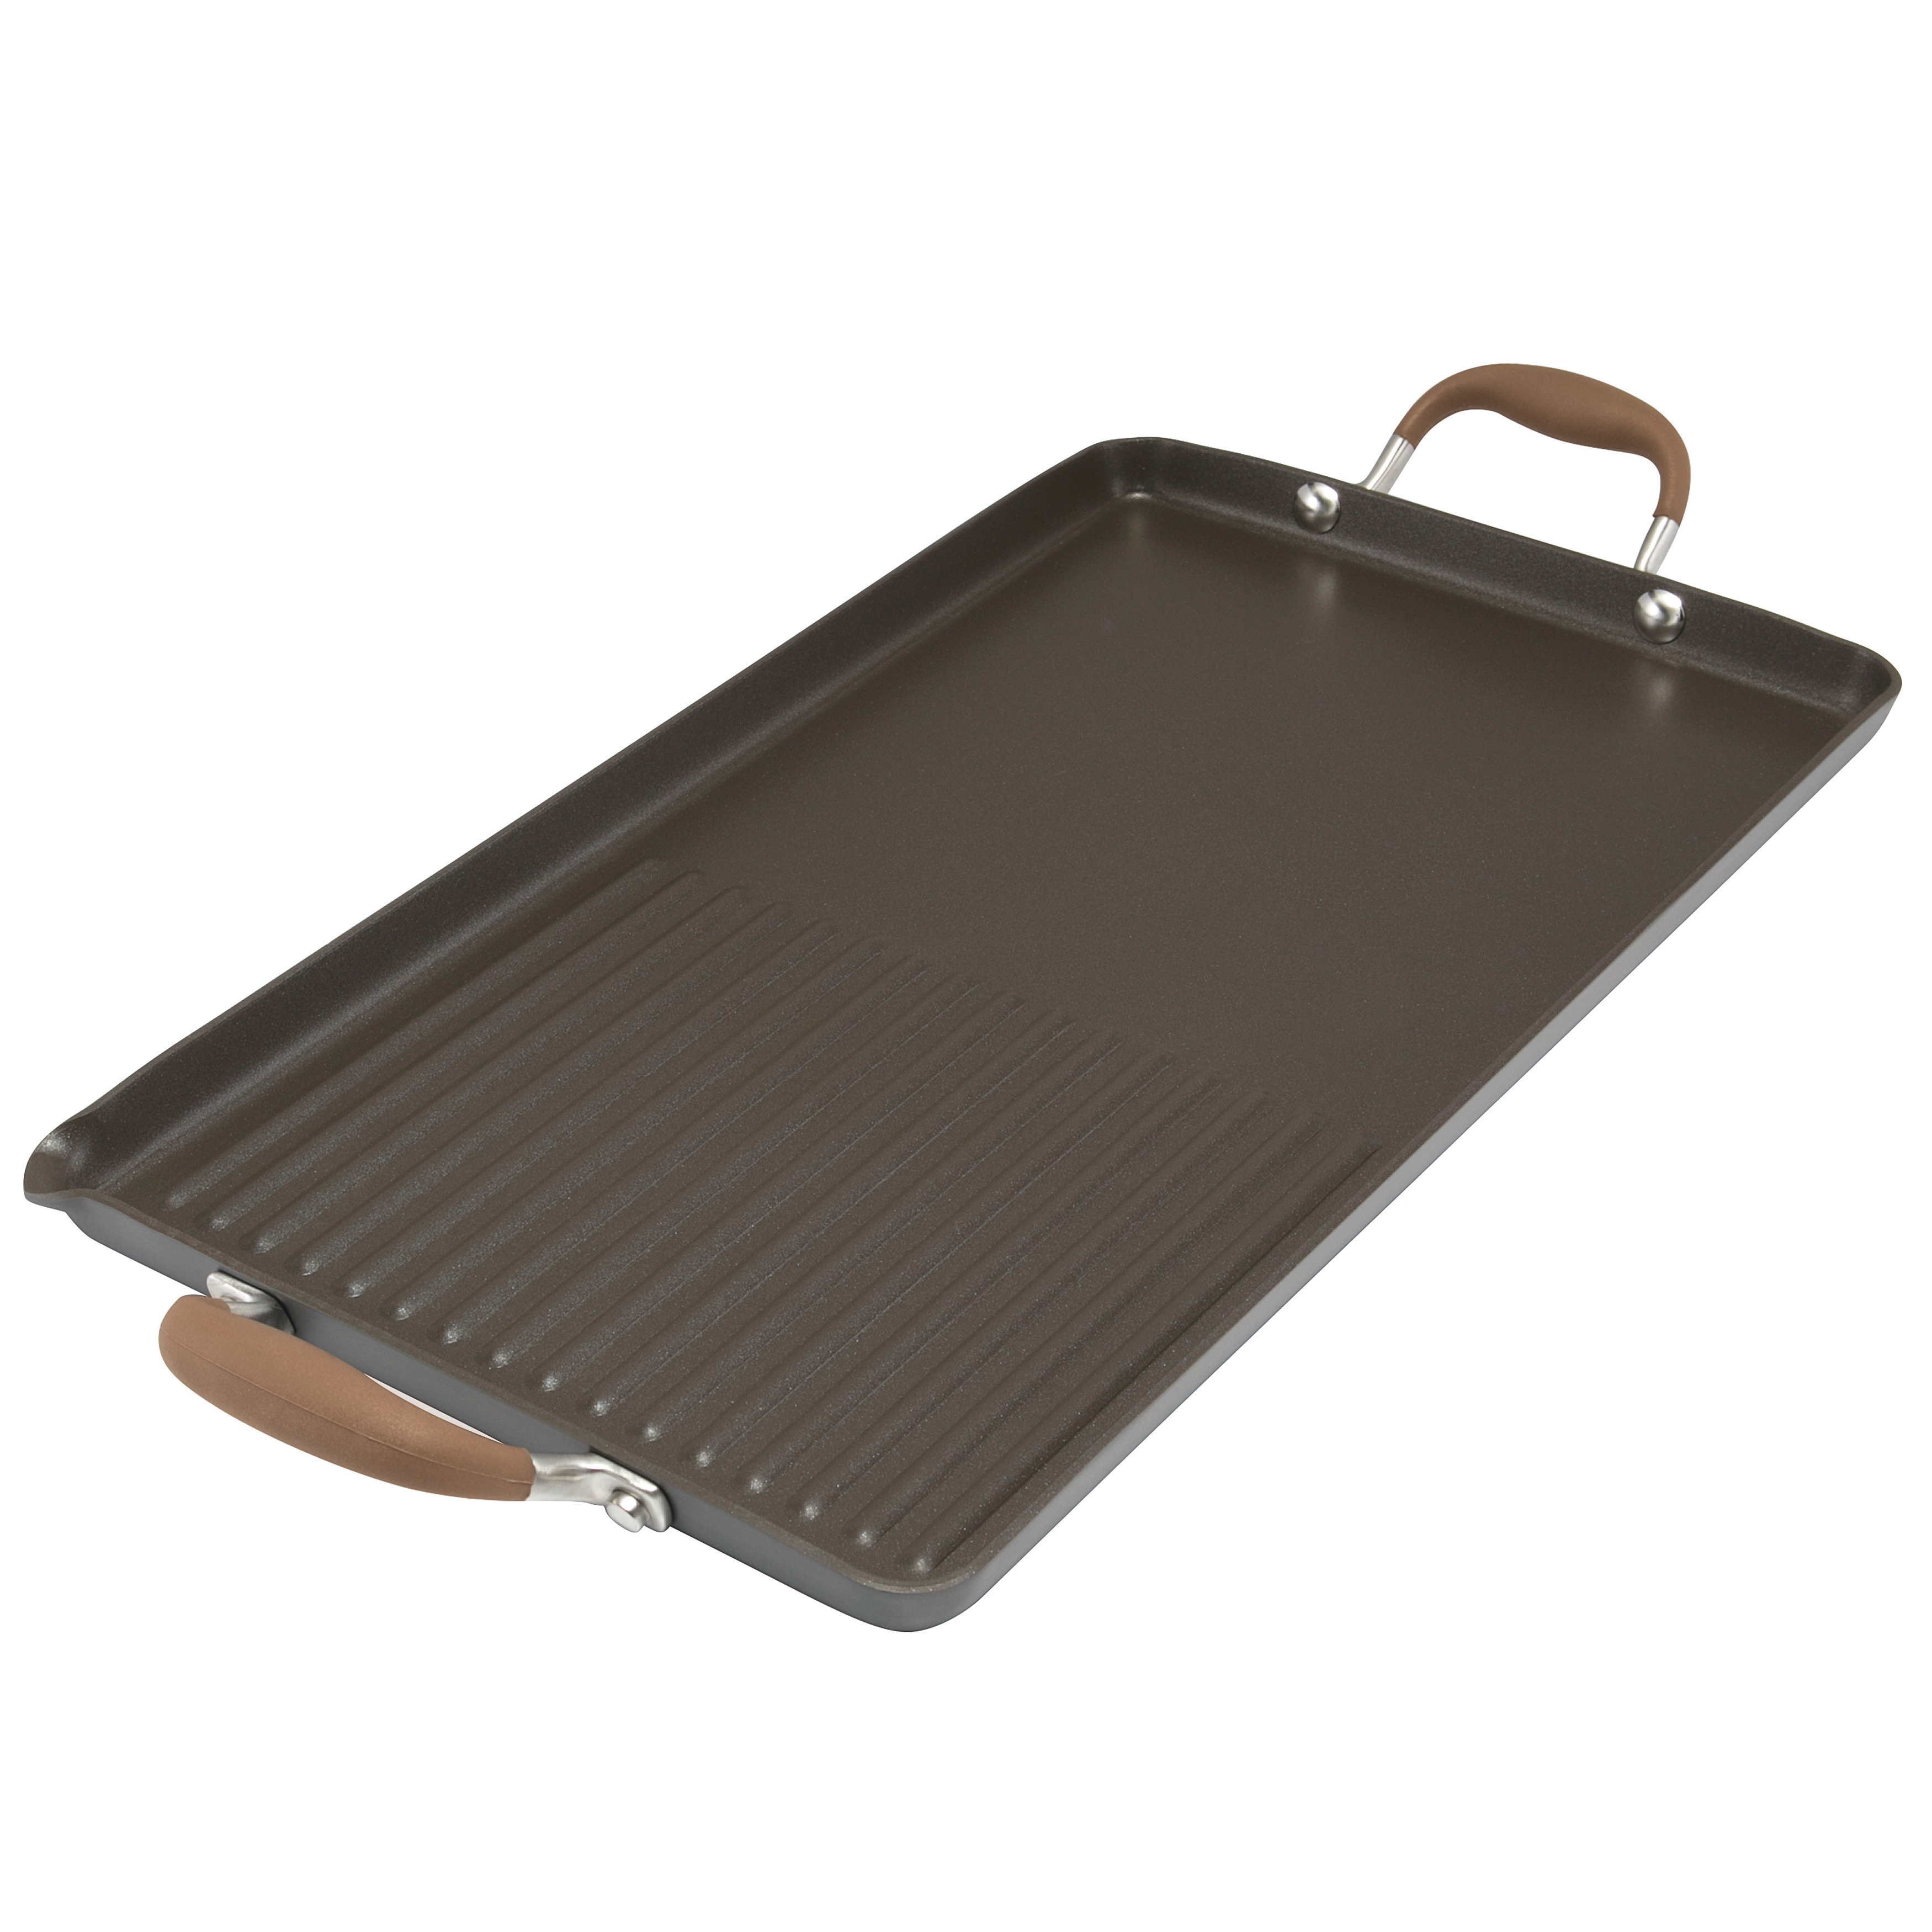 Top Product Reviews for Anolon Advanced Bronze Hard-Anodized Nonstick 10- Inch x 18-Inch Double Burner Griddle and Grill Pan with Pour Spout  13218506 Bed Bath  Beyond